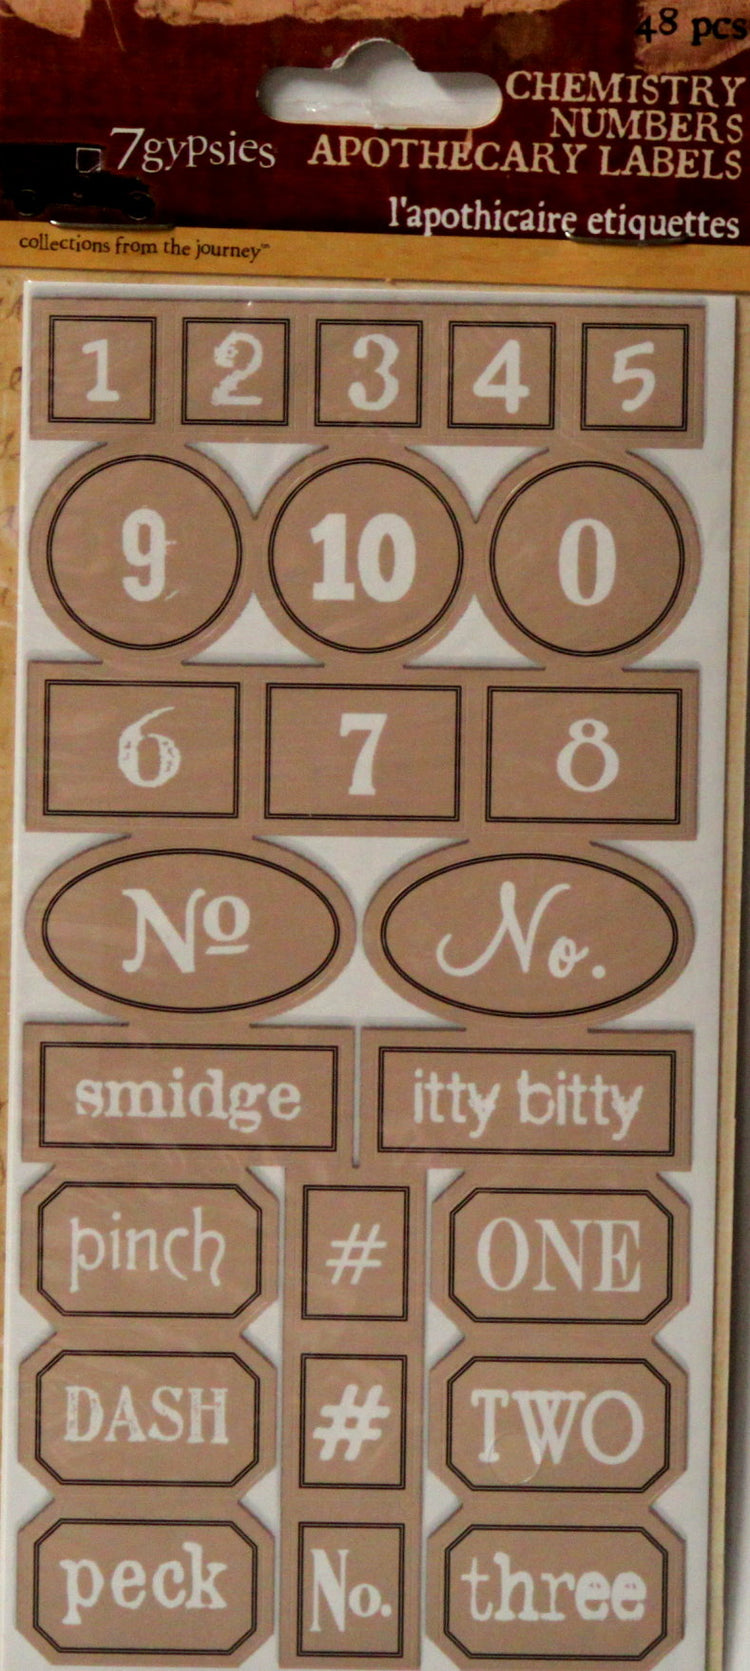 7gypsies Chemistry Numbers Apothecary Labels Stickers